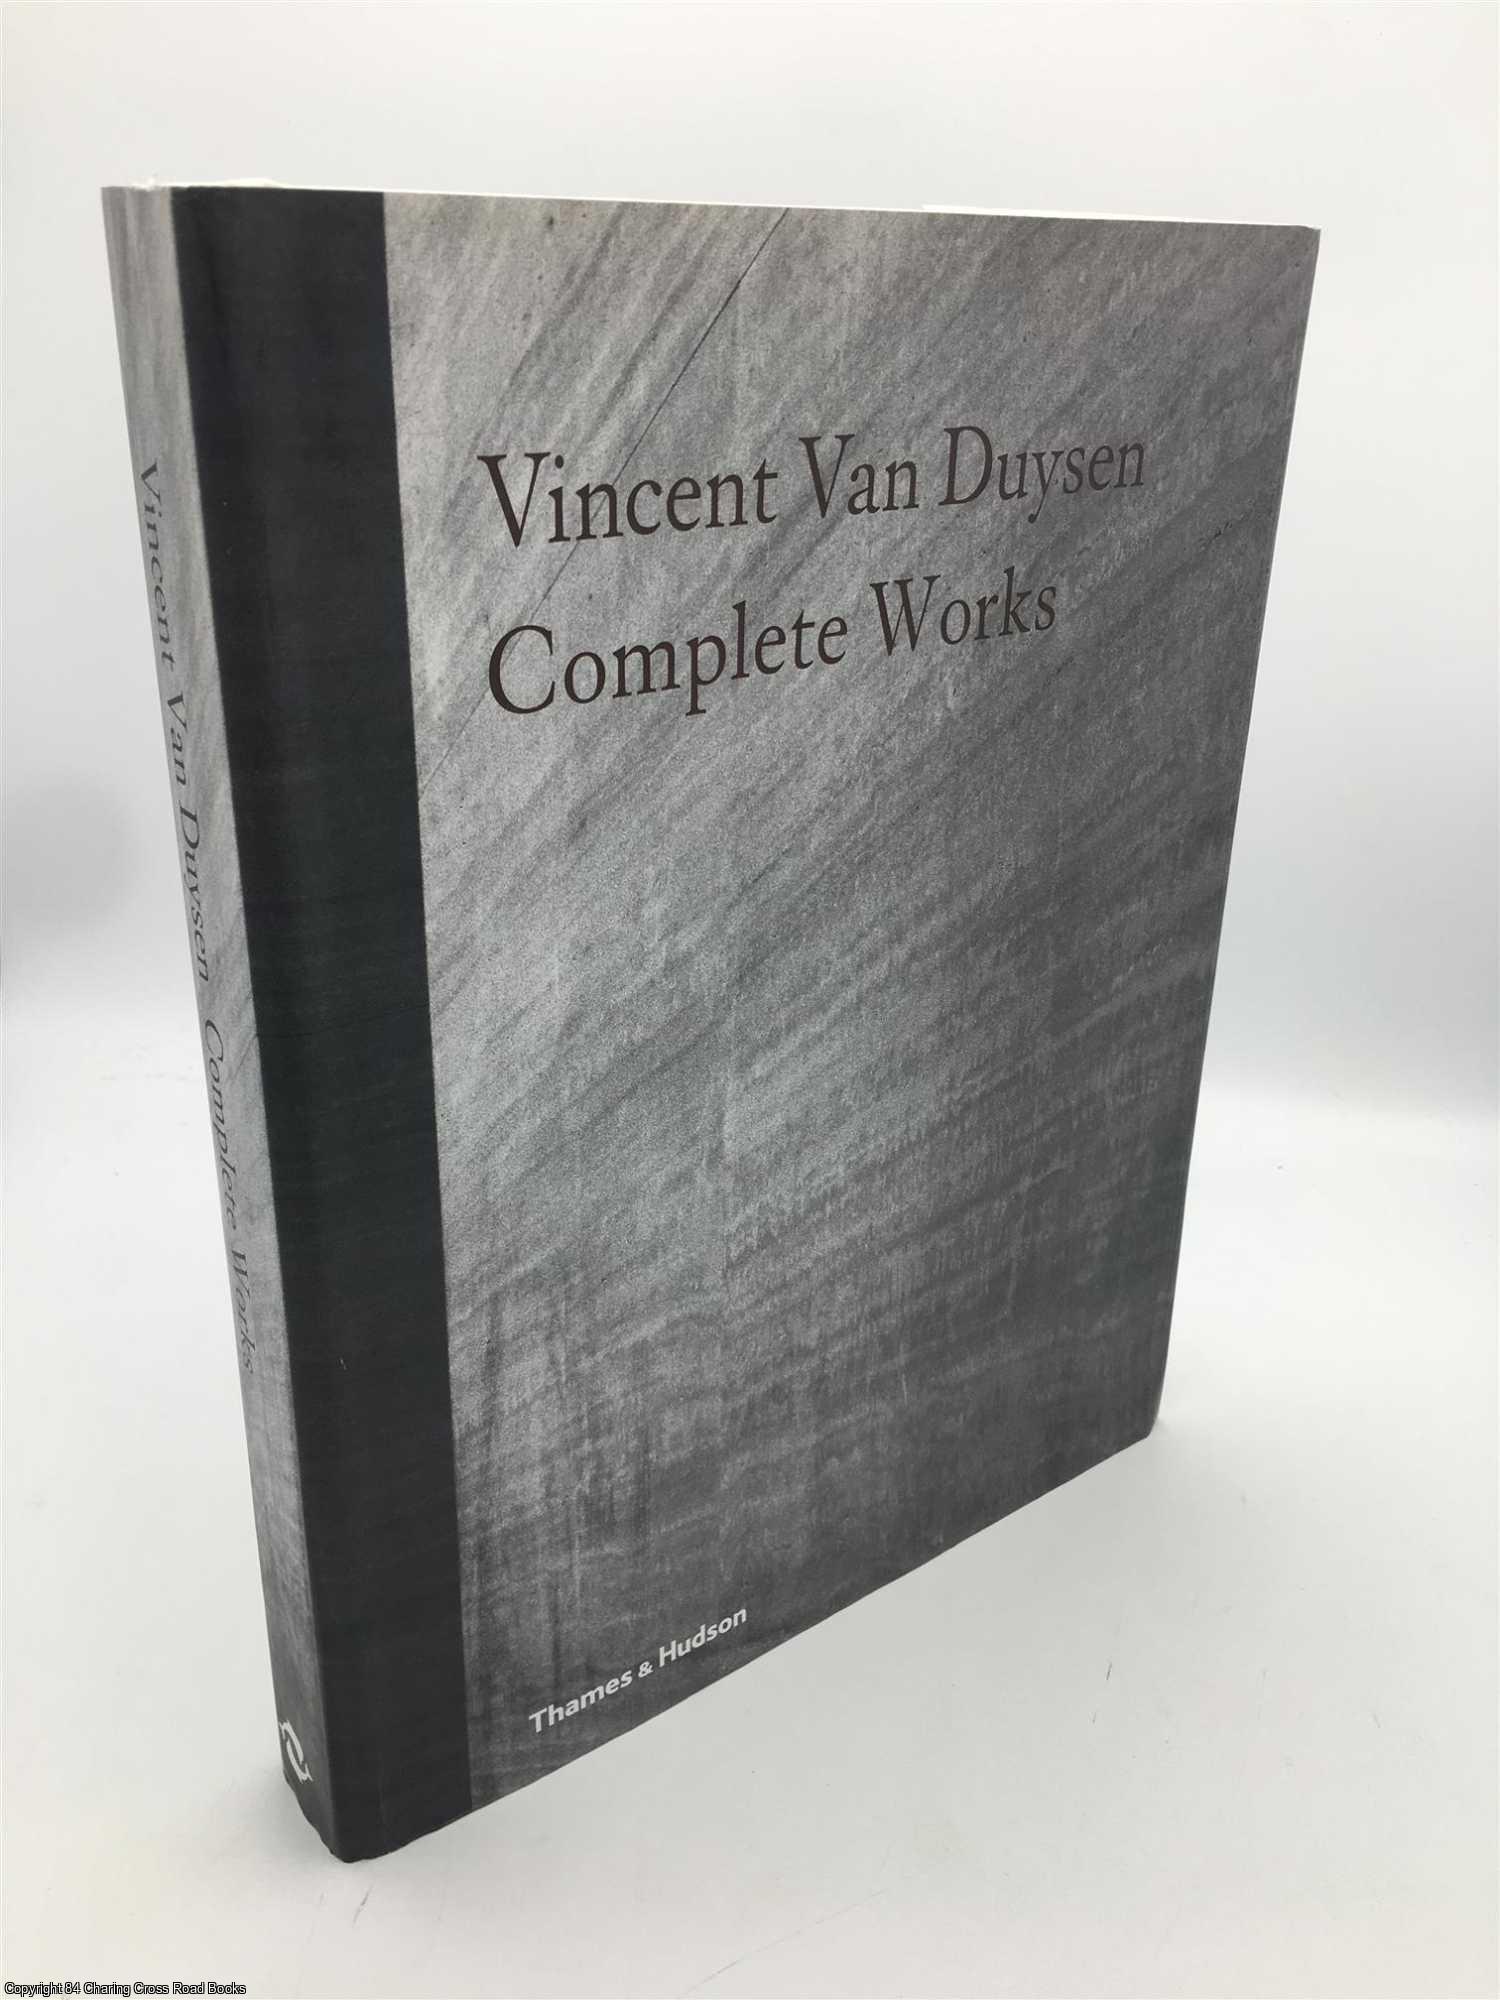 Vincent Van Duysen: Complete Works by Marc Dubois, Ilse Crawford on 84  Charing Cross Rare Books